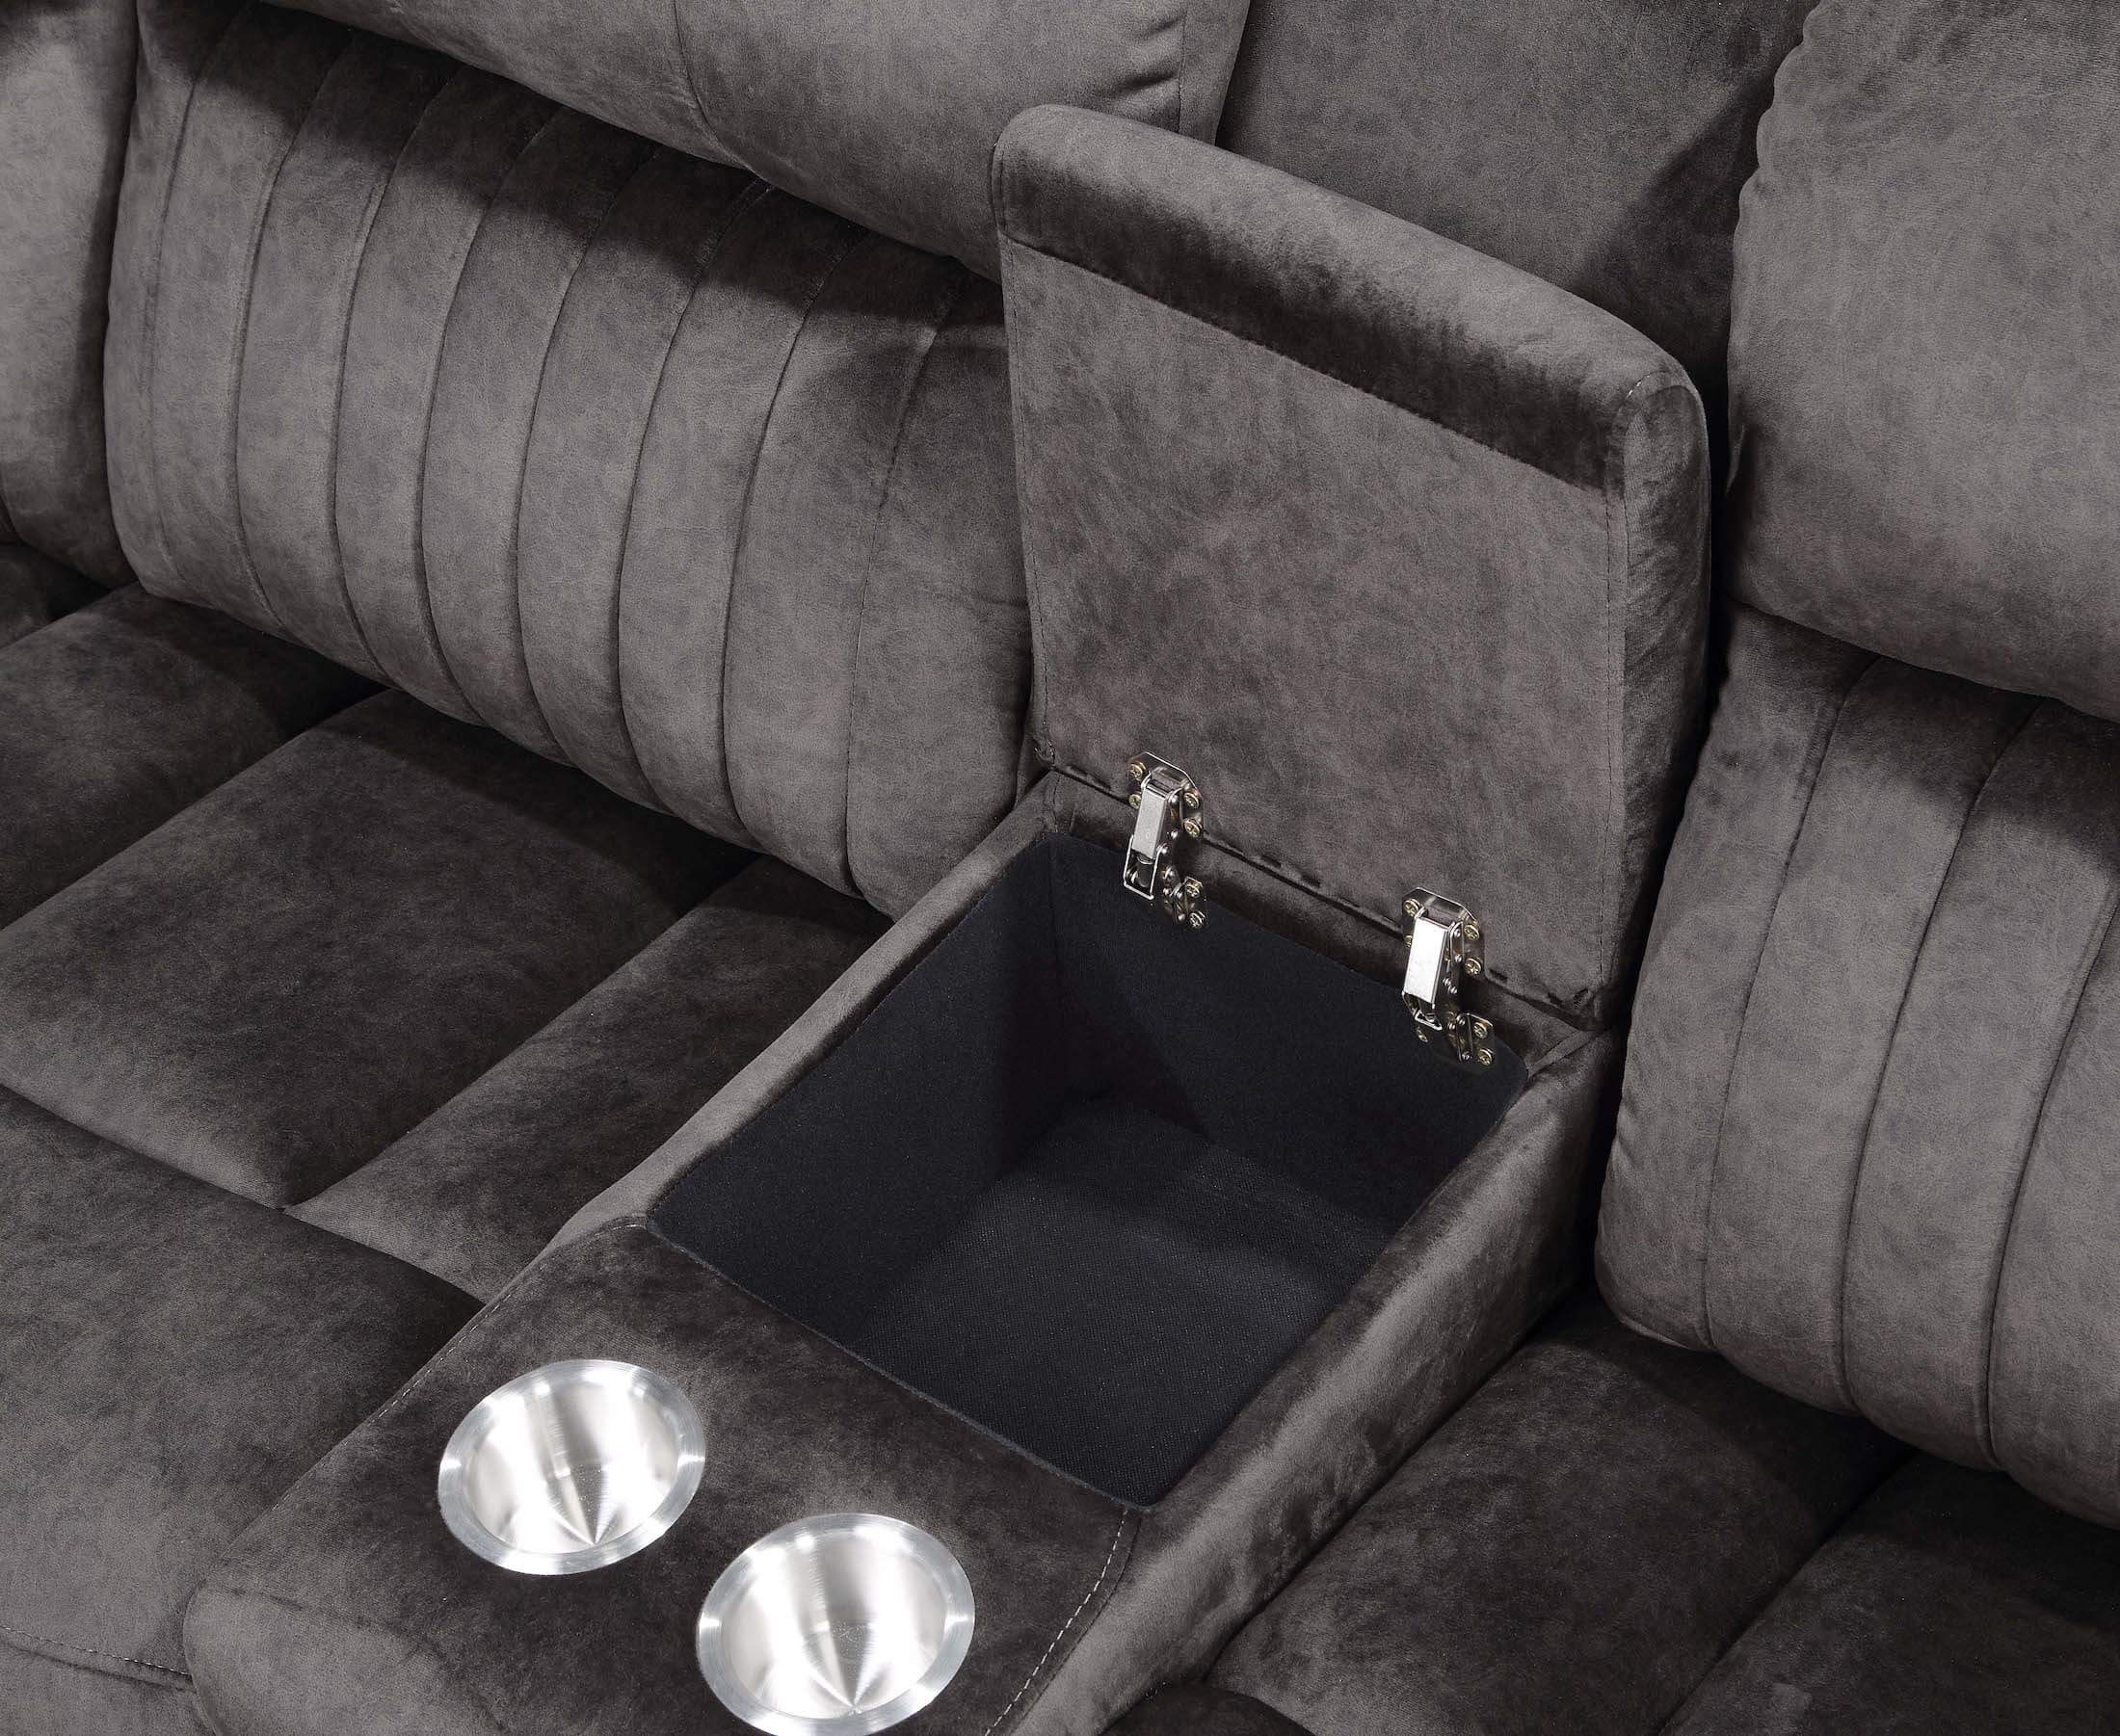 8176-11 (1)8176 Power Brown Sectional Milton Green Stars storage console and cup holders in grey 2 cupholders stainless steel